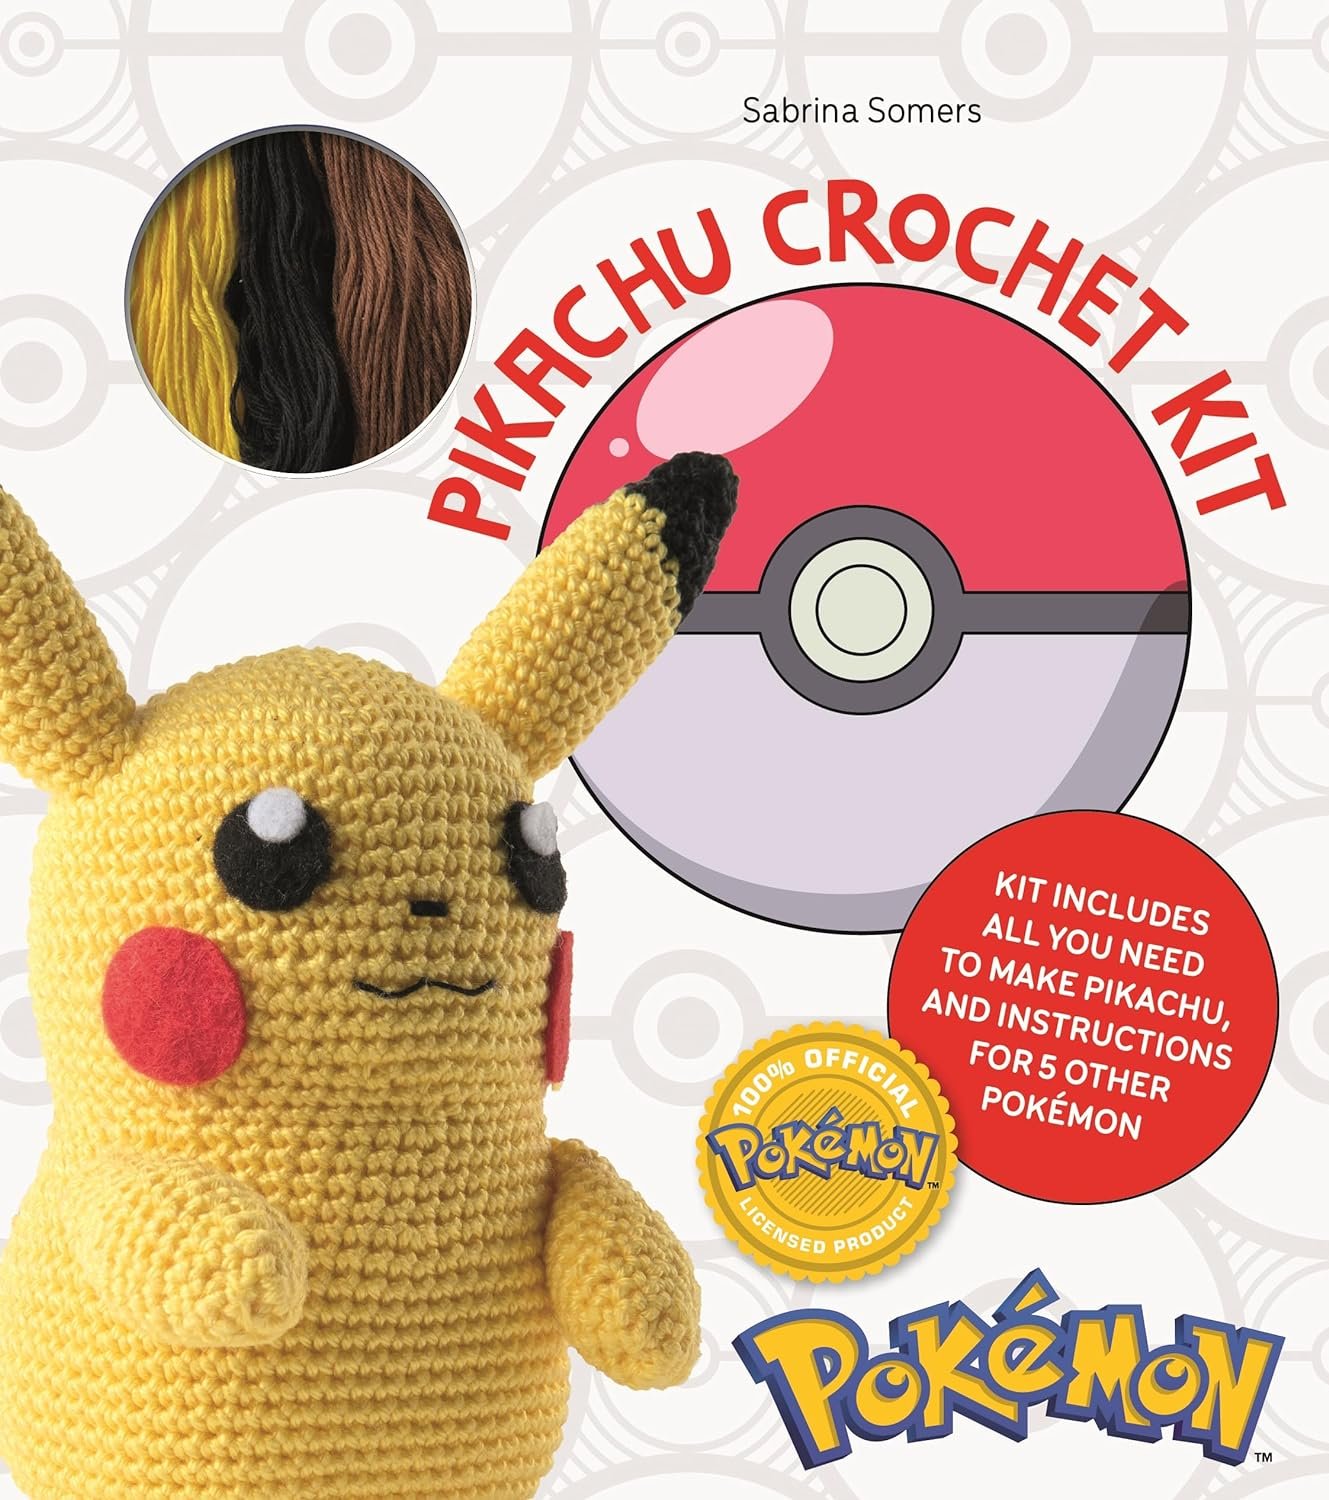 Image of a PokeMon Crochet Pikachu Kit box featuring a plush Pikachu, crochet materials, and a pokéball. The kit includes instructions and supplies for making Pikachu, endorsed by Sabrina Somers (Author).